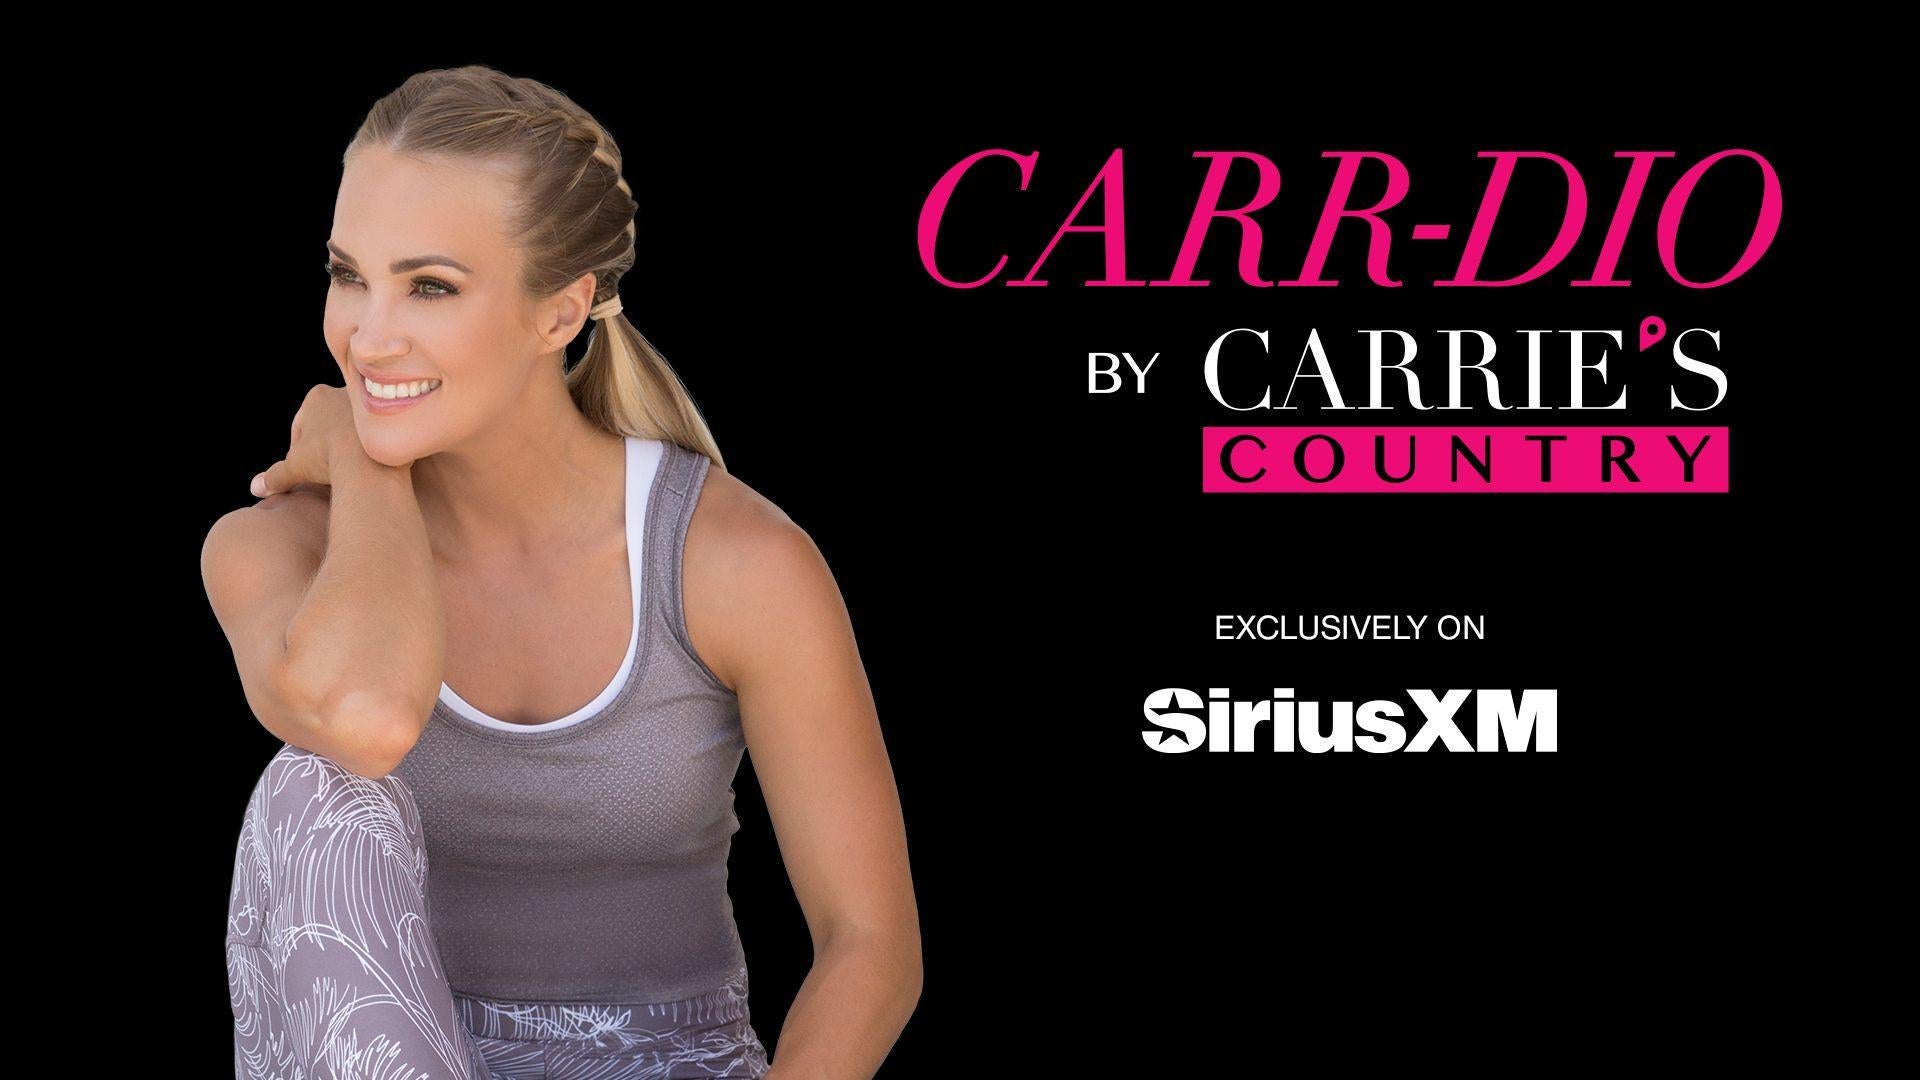 siriusxm-carr-dio-by-carries-country-carrie-underwood.jpg